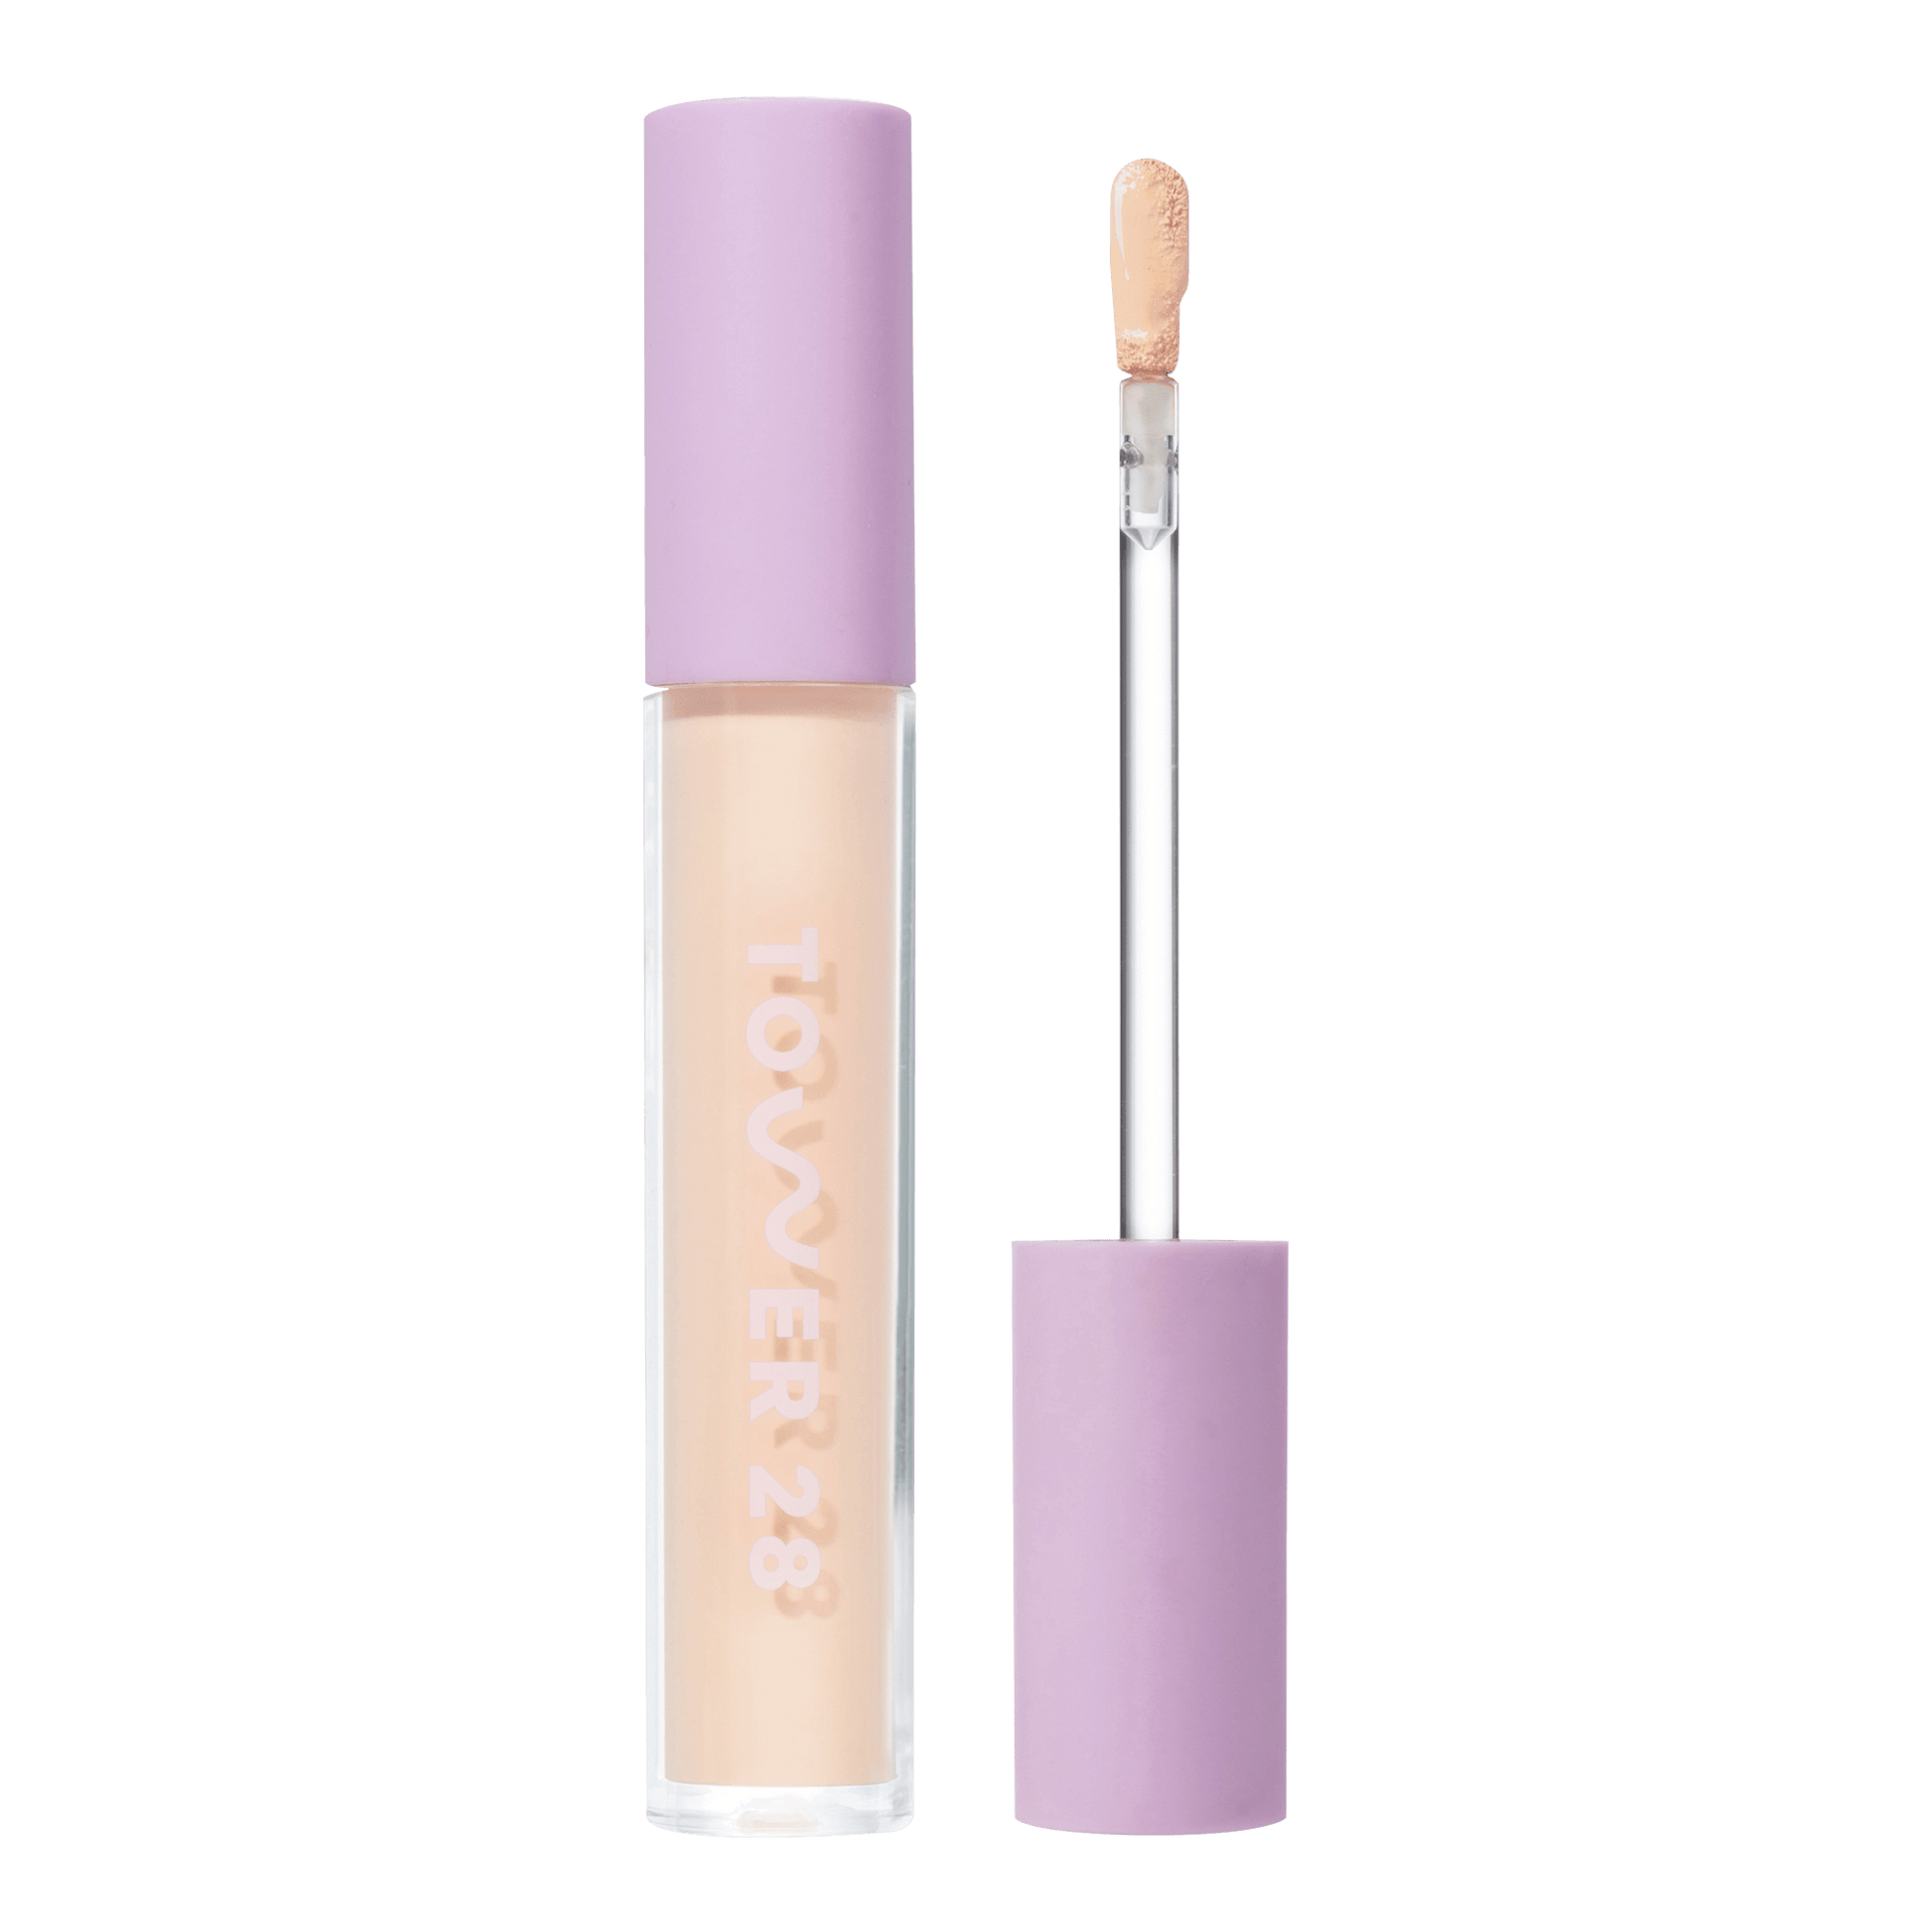 Tower 28 Beauty Swipe Serum Concealer in the shade 3.0 CC